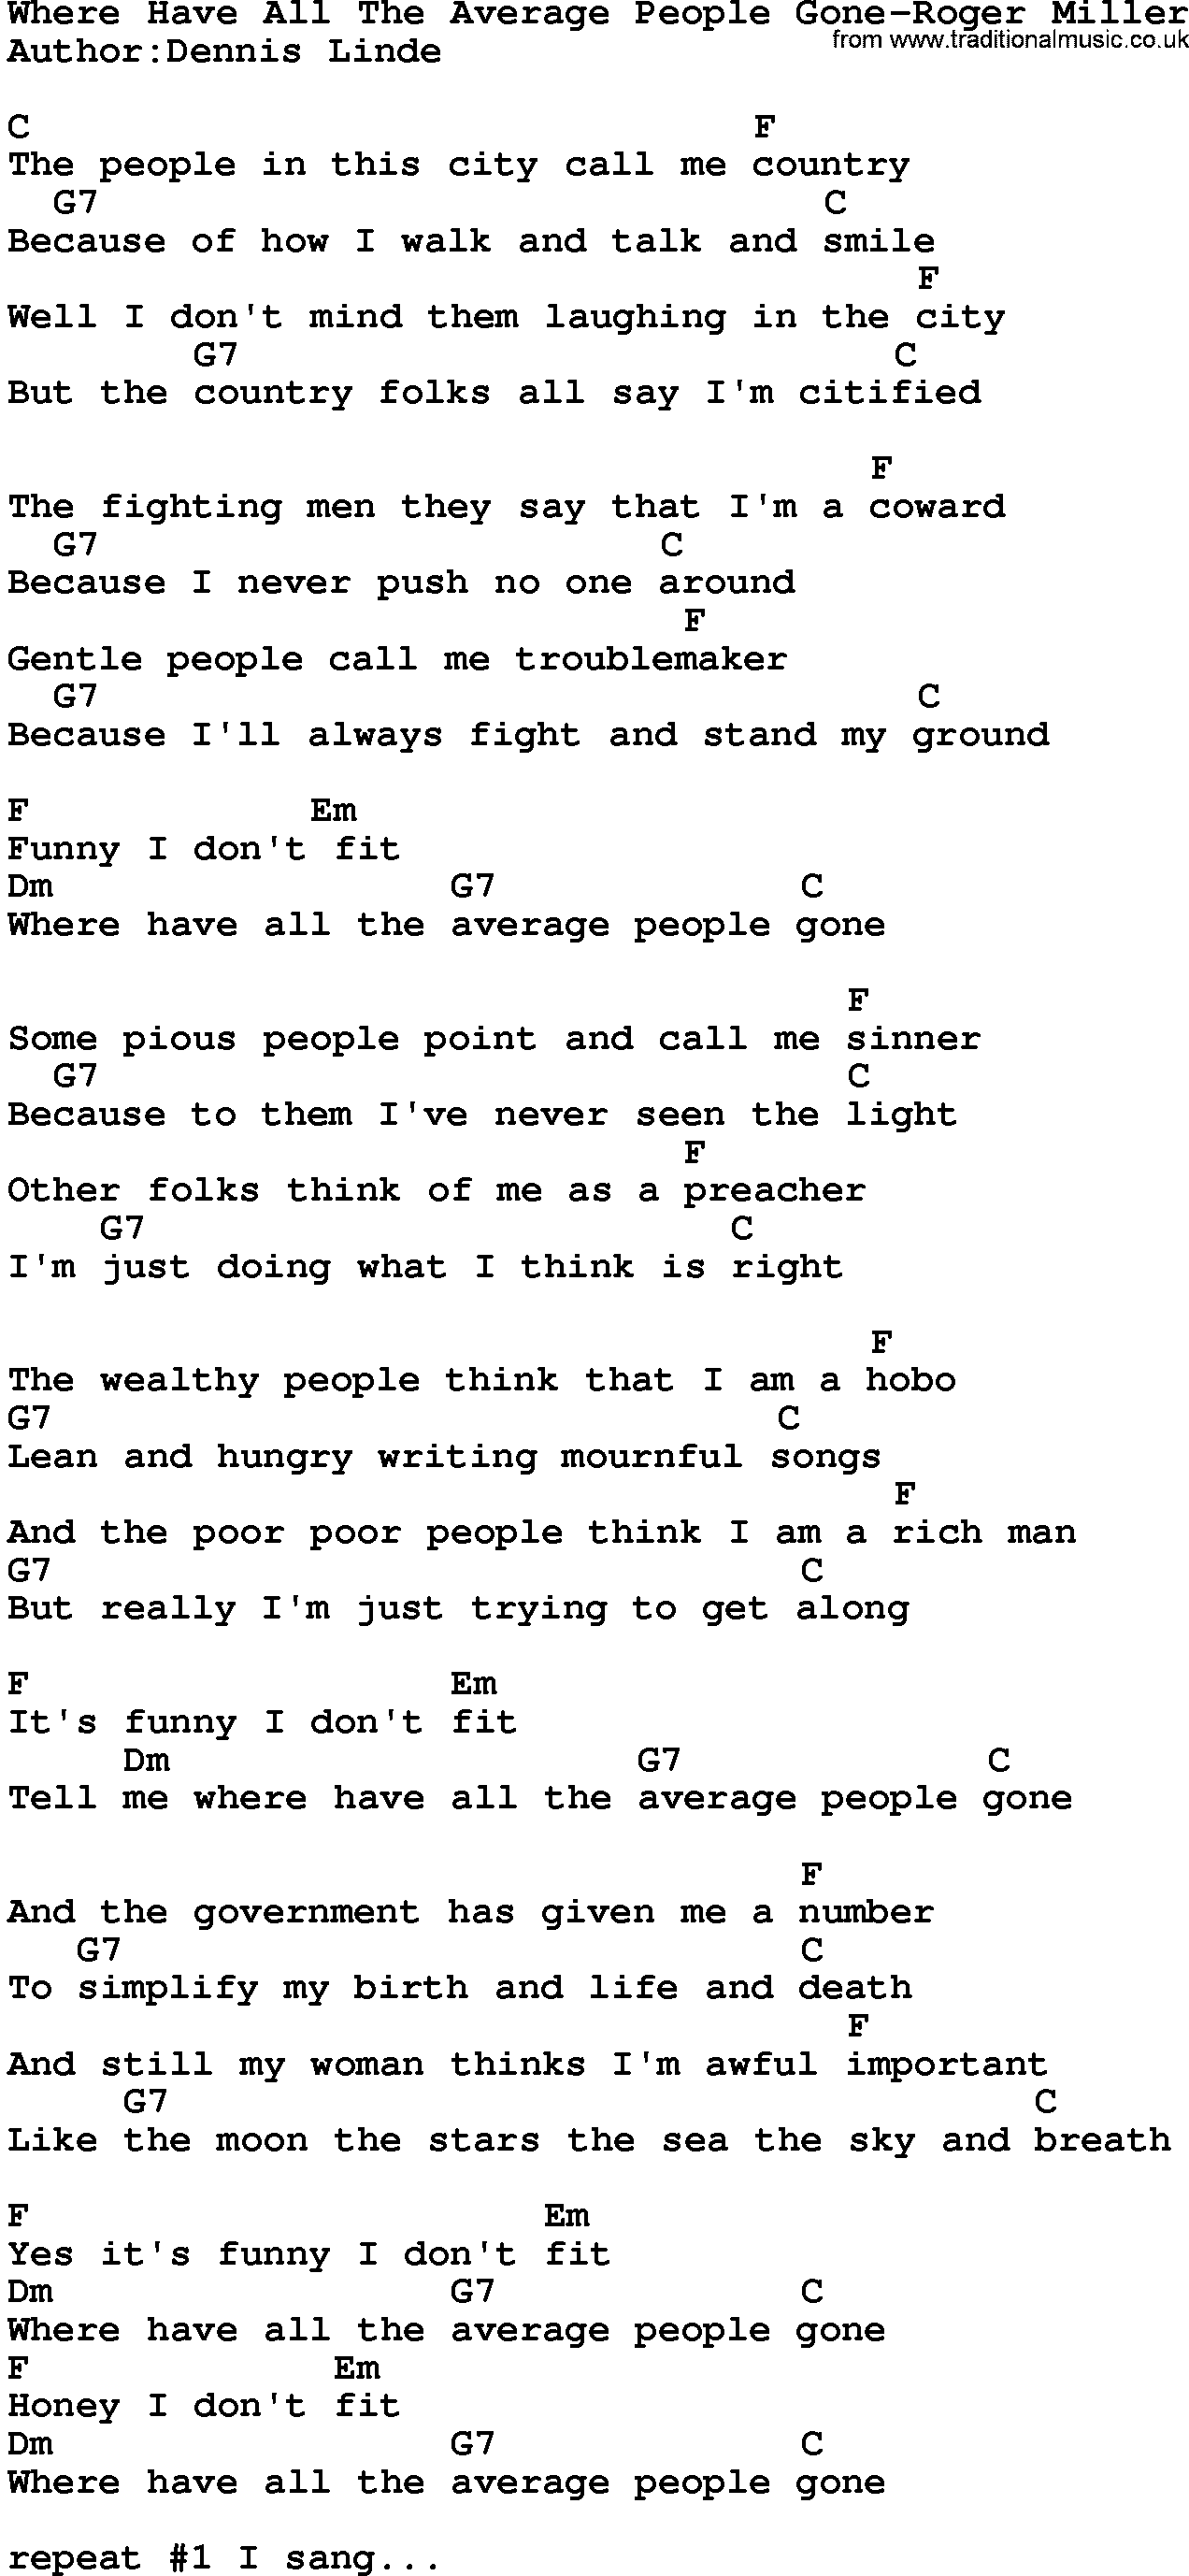 Country music song: Where Have All The Average People Gone-Roger Miller lyrics and chords